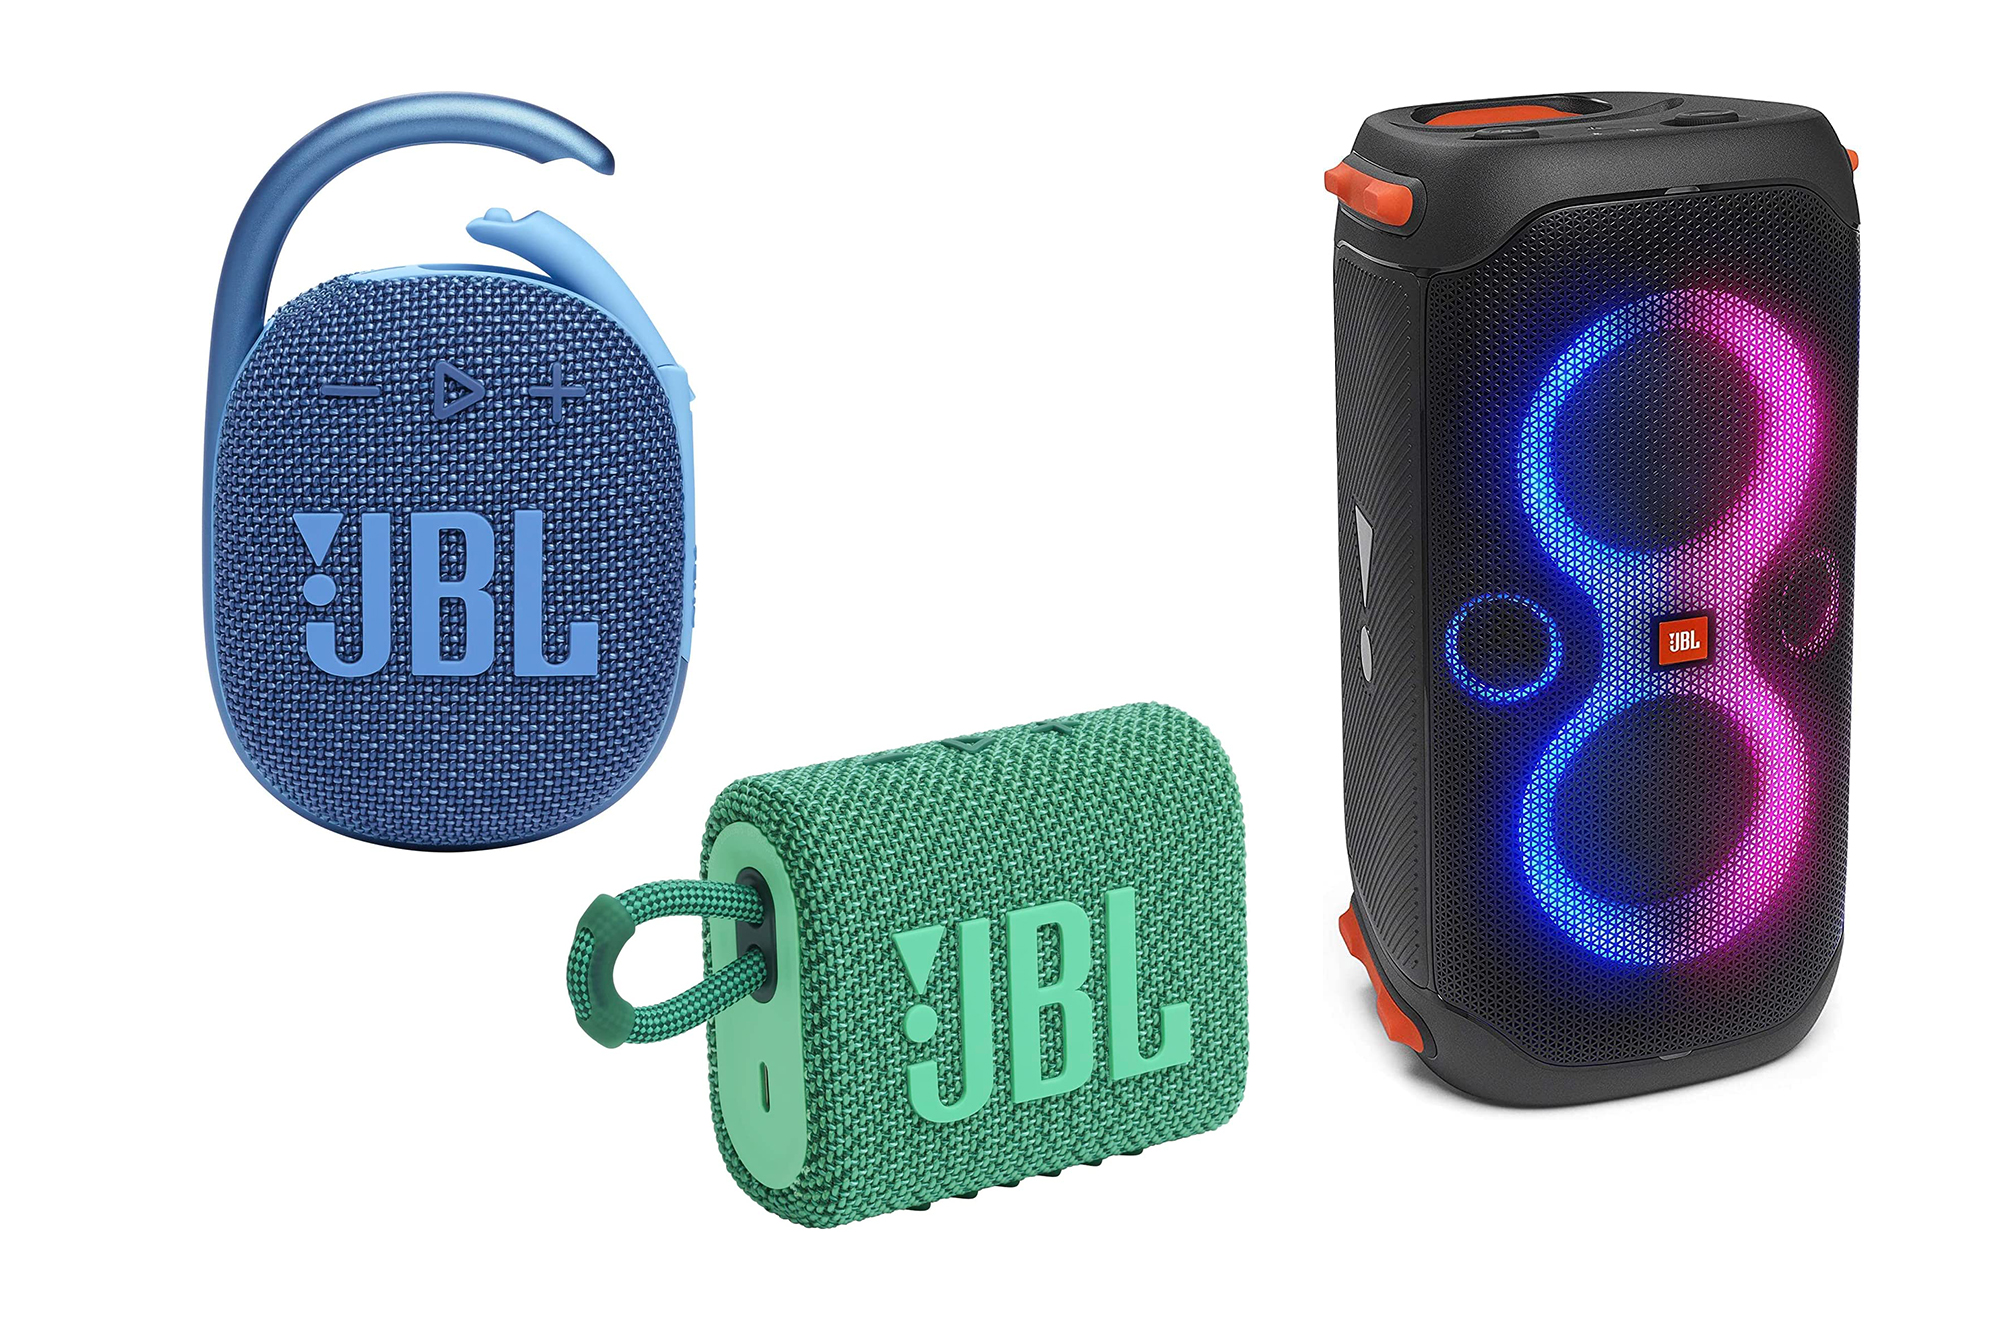 Bring all the bops and boys to the yard with outdoor speaker deals on Amazon